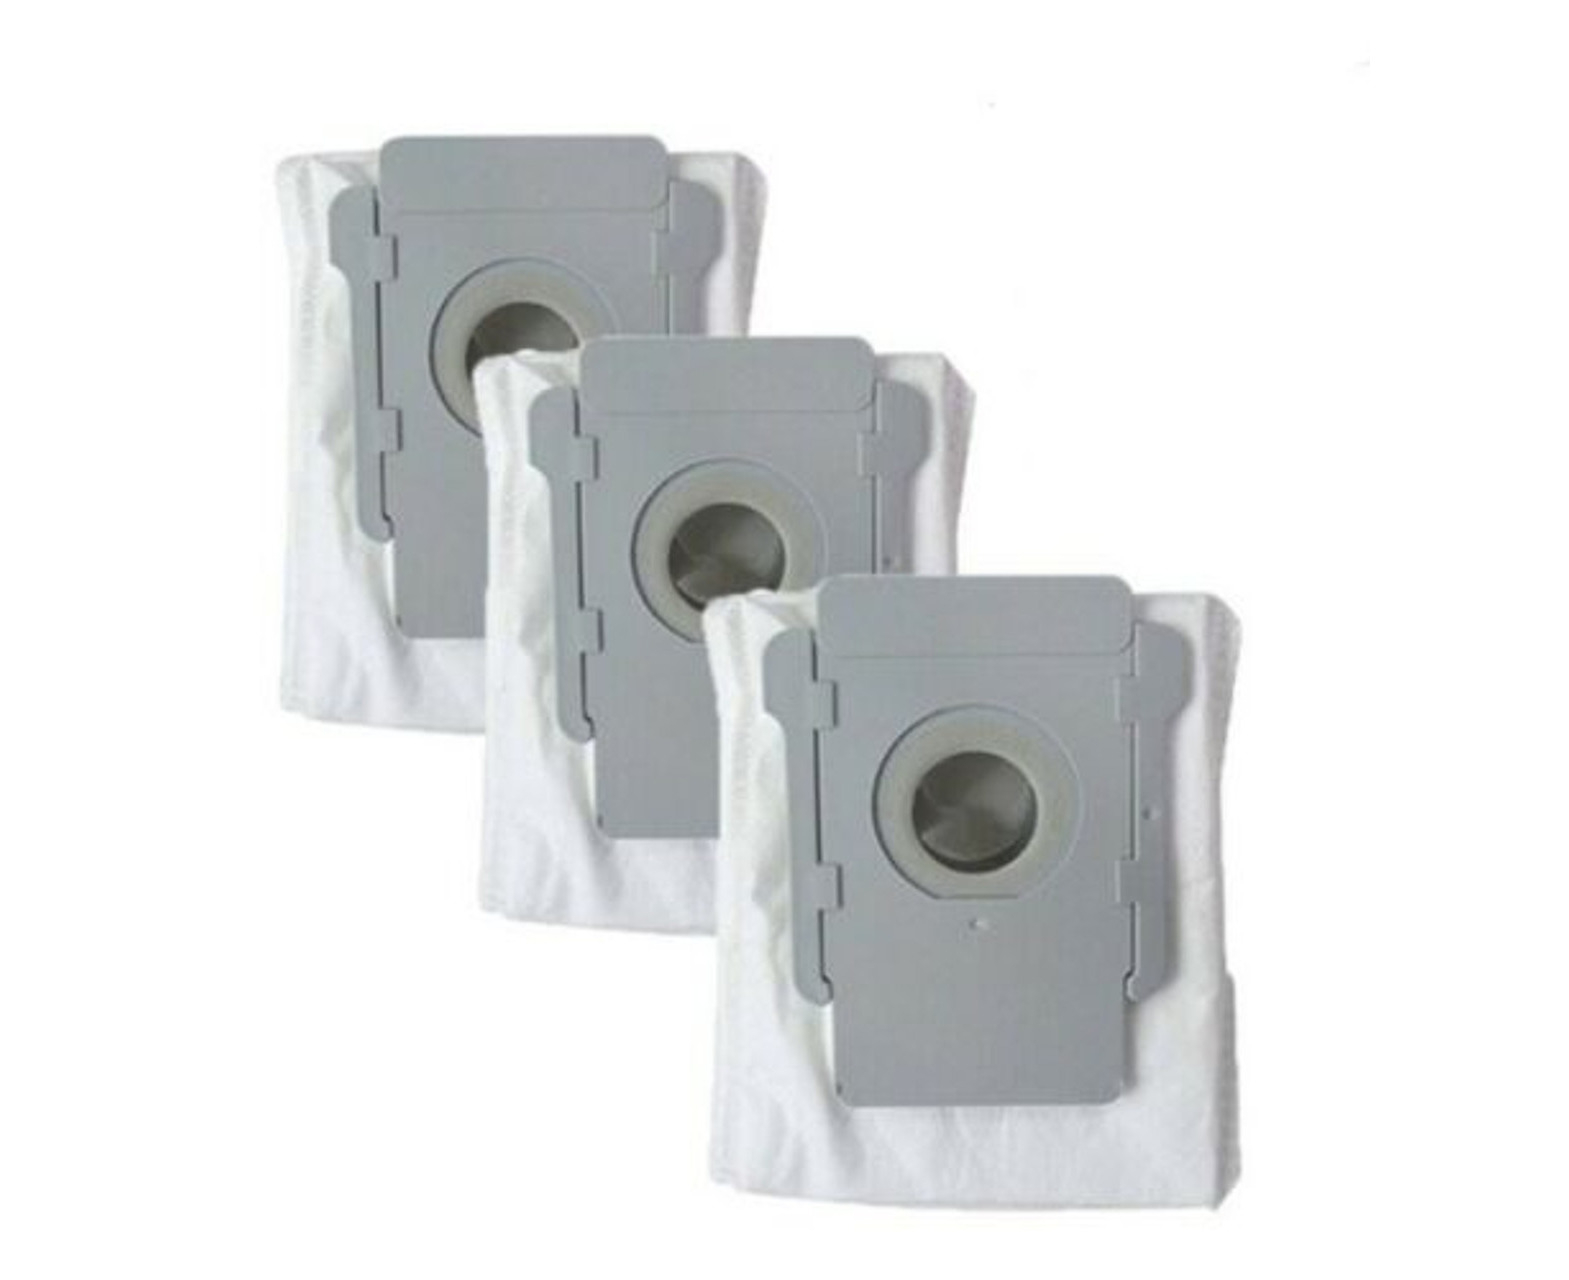 3 X vacuum bags for iRobot Roomba i3+, i7+ and s9+ robot vacuum cleaners |  Www.catch.com.au